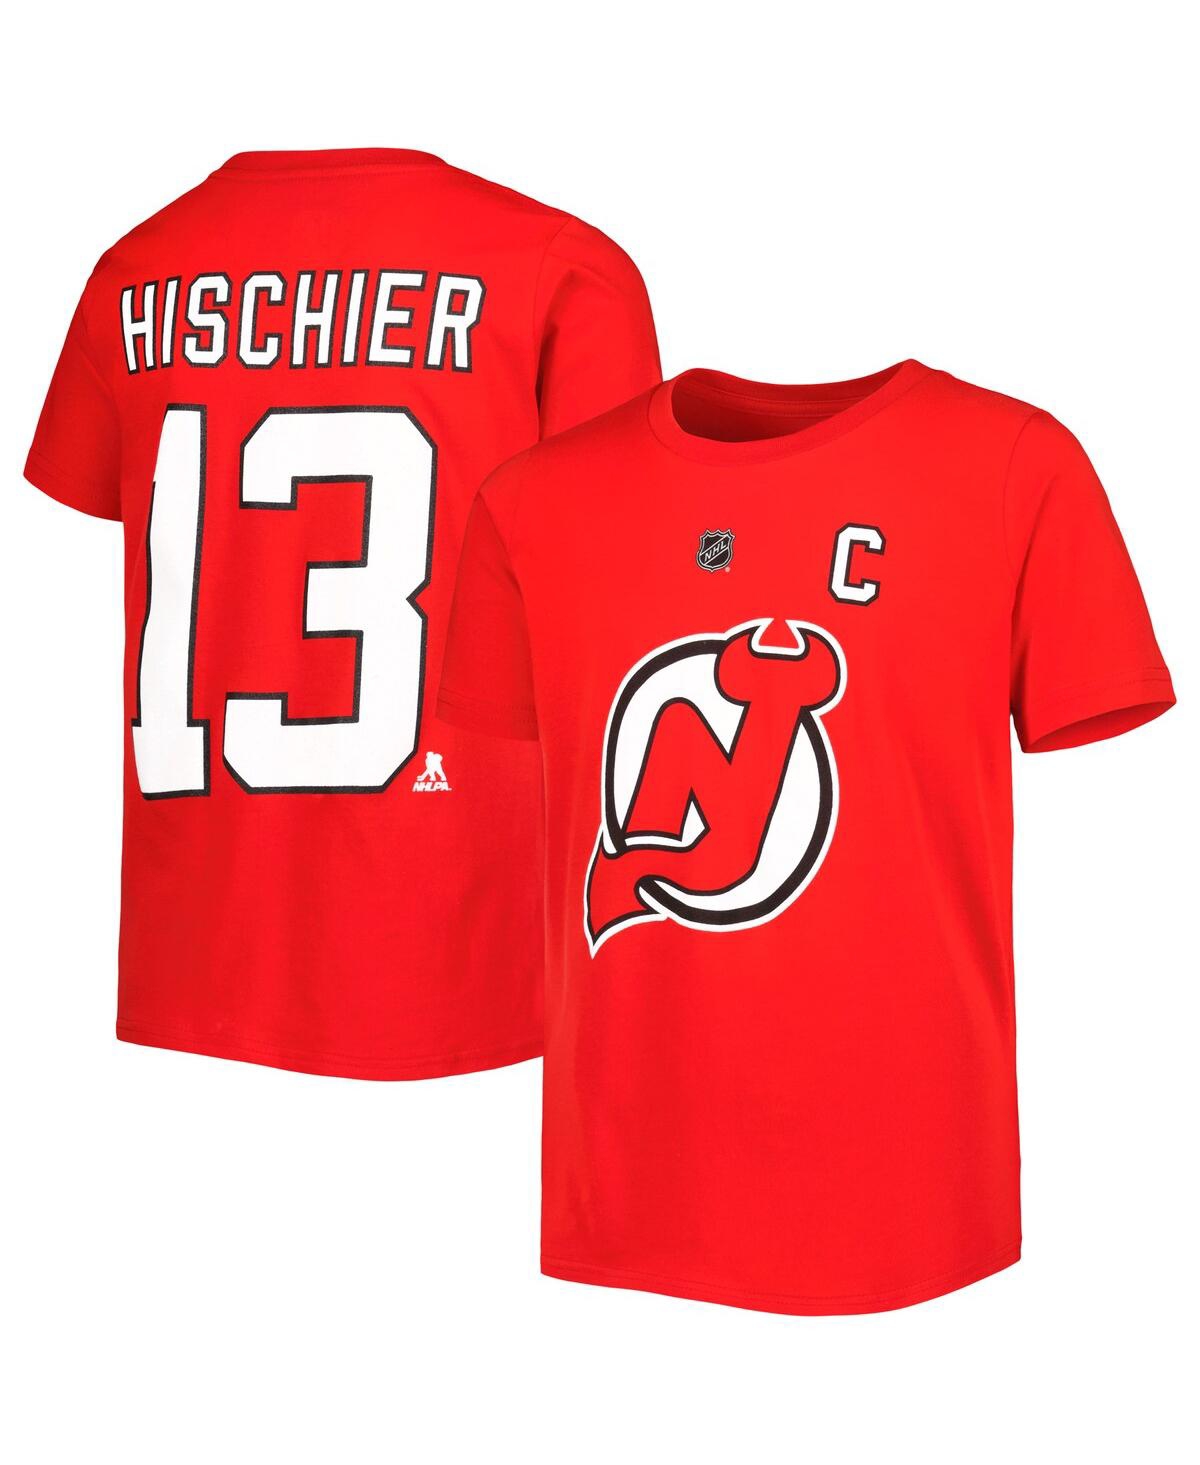 Outerstuff Kids' Big Boys Nico Hischier Red New Jersey Devils Player Name And Number T-shirt